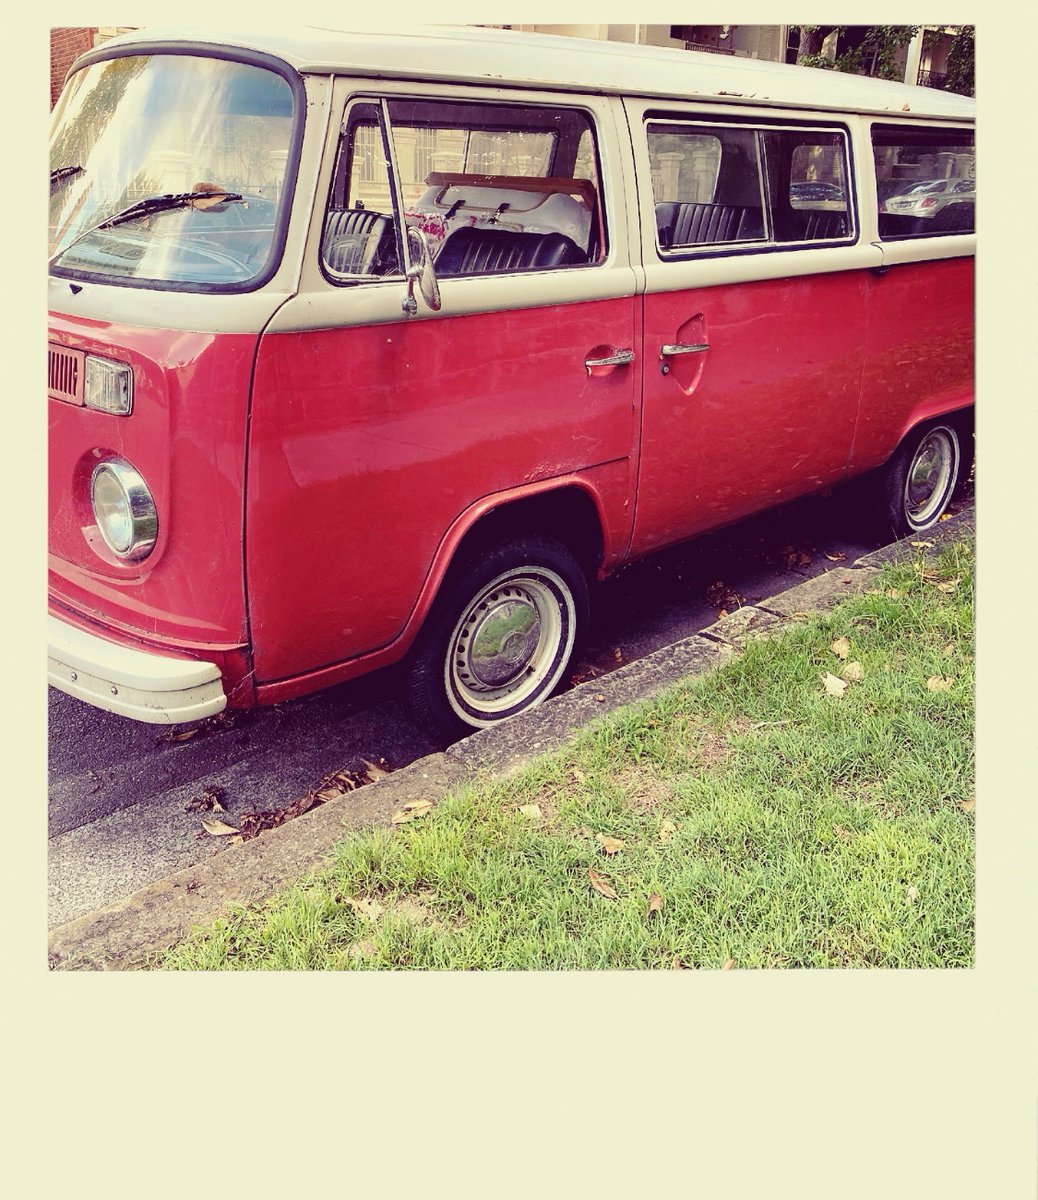 This is my bag for sure! #kombi #oldschool #countrystyle #redkombi #cars #countrymusic #australiancountrymusic   #countrysongs #newmusic #radio #austrailianmusicians #muaicismylife #keepmoving #spotify #itunes # #charting #alternative #countrymusician #altcountry #indiecountry